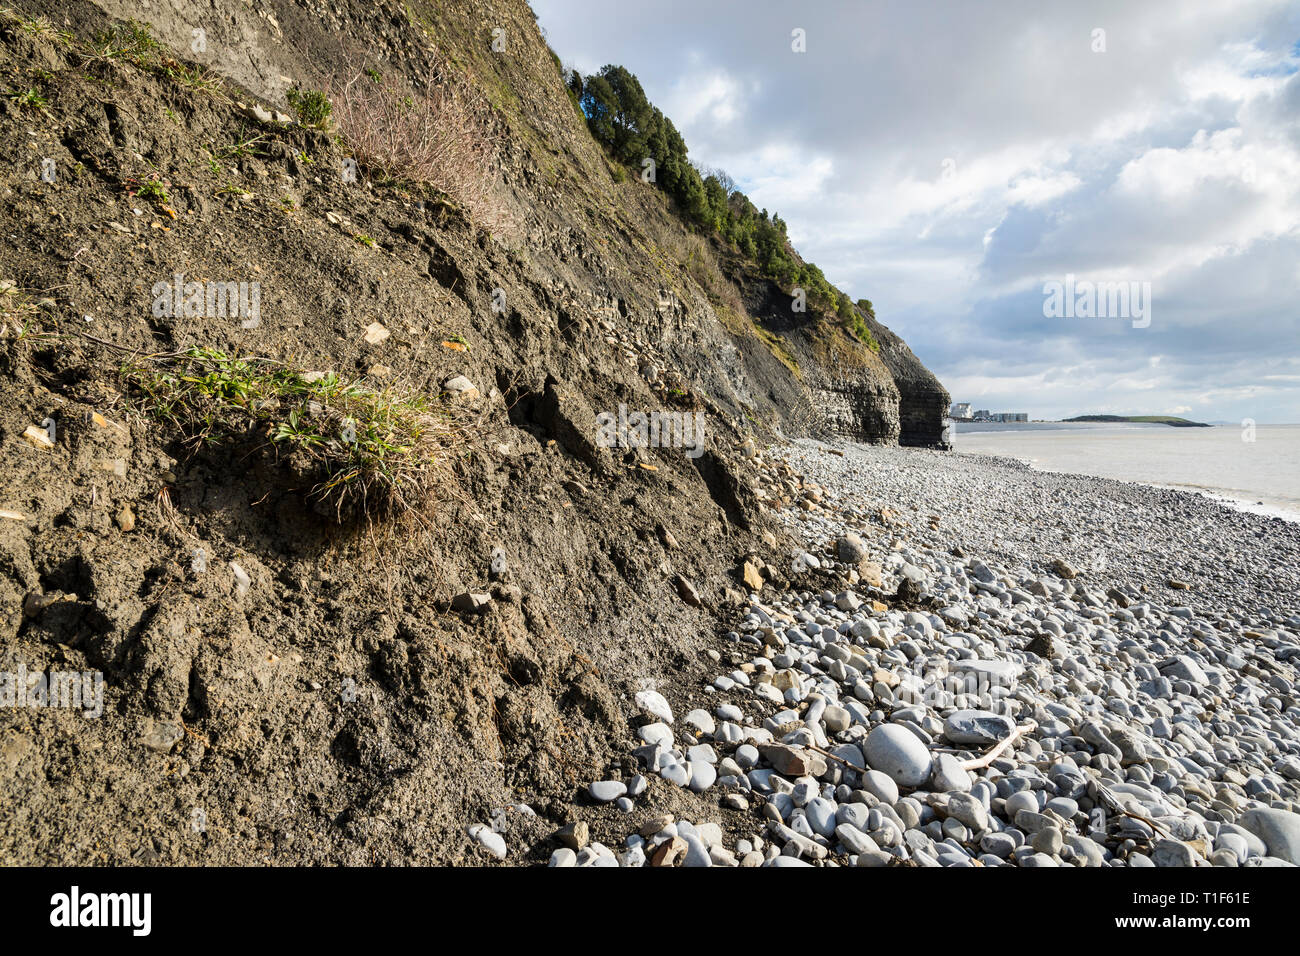 Earth and mud at the base of cliffs due to erosion Stock Photo